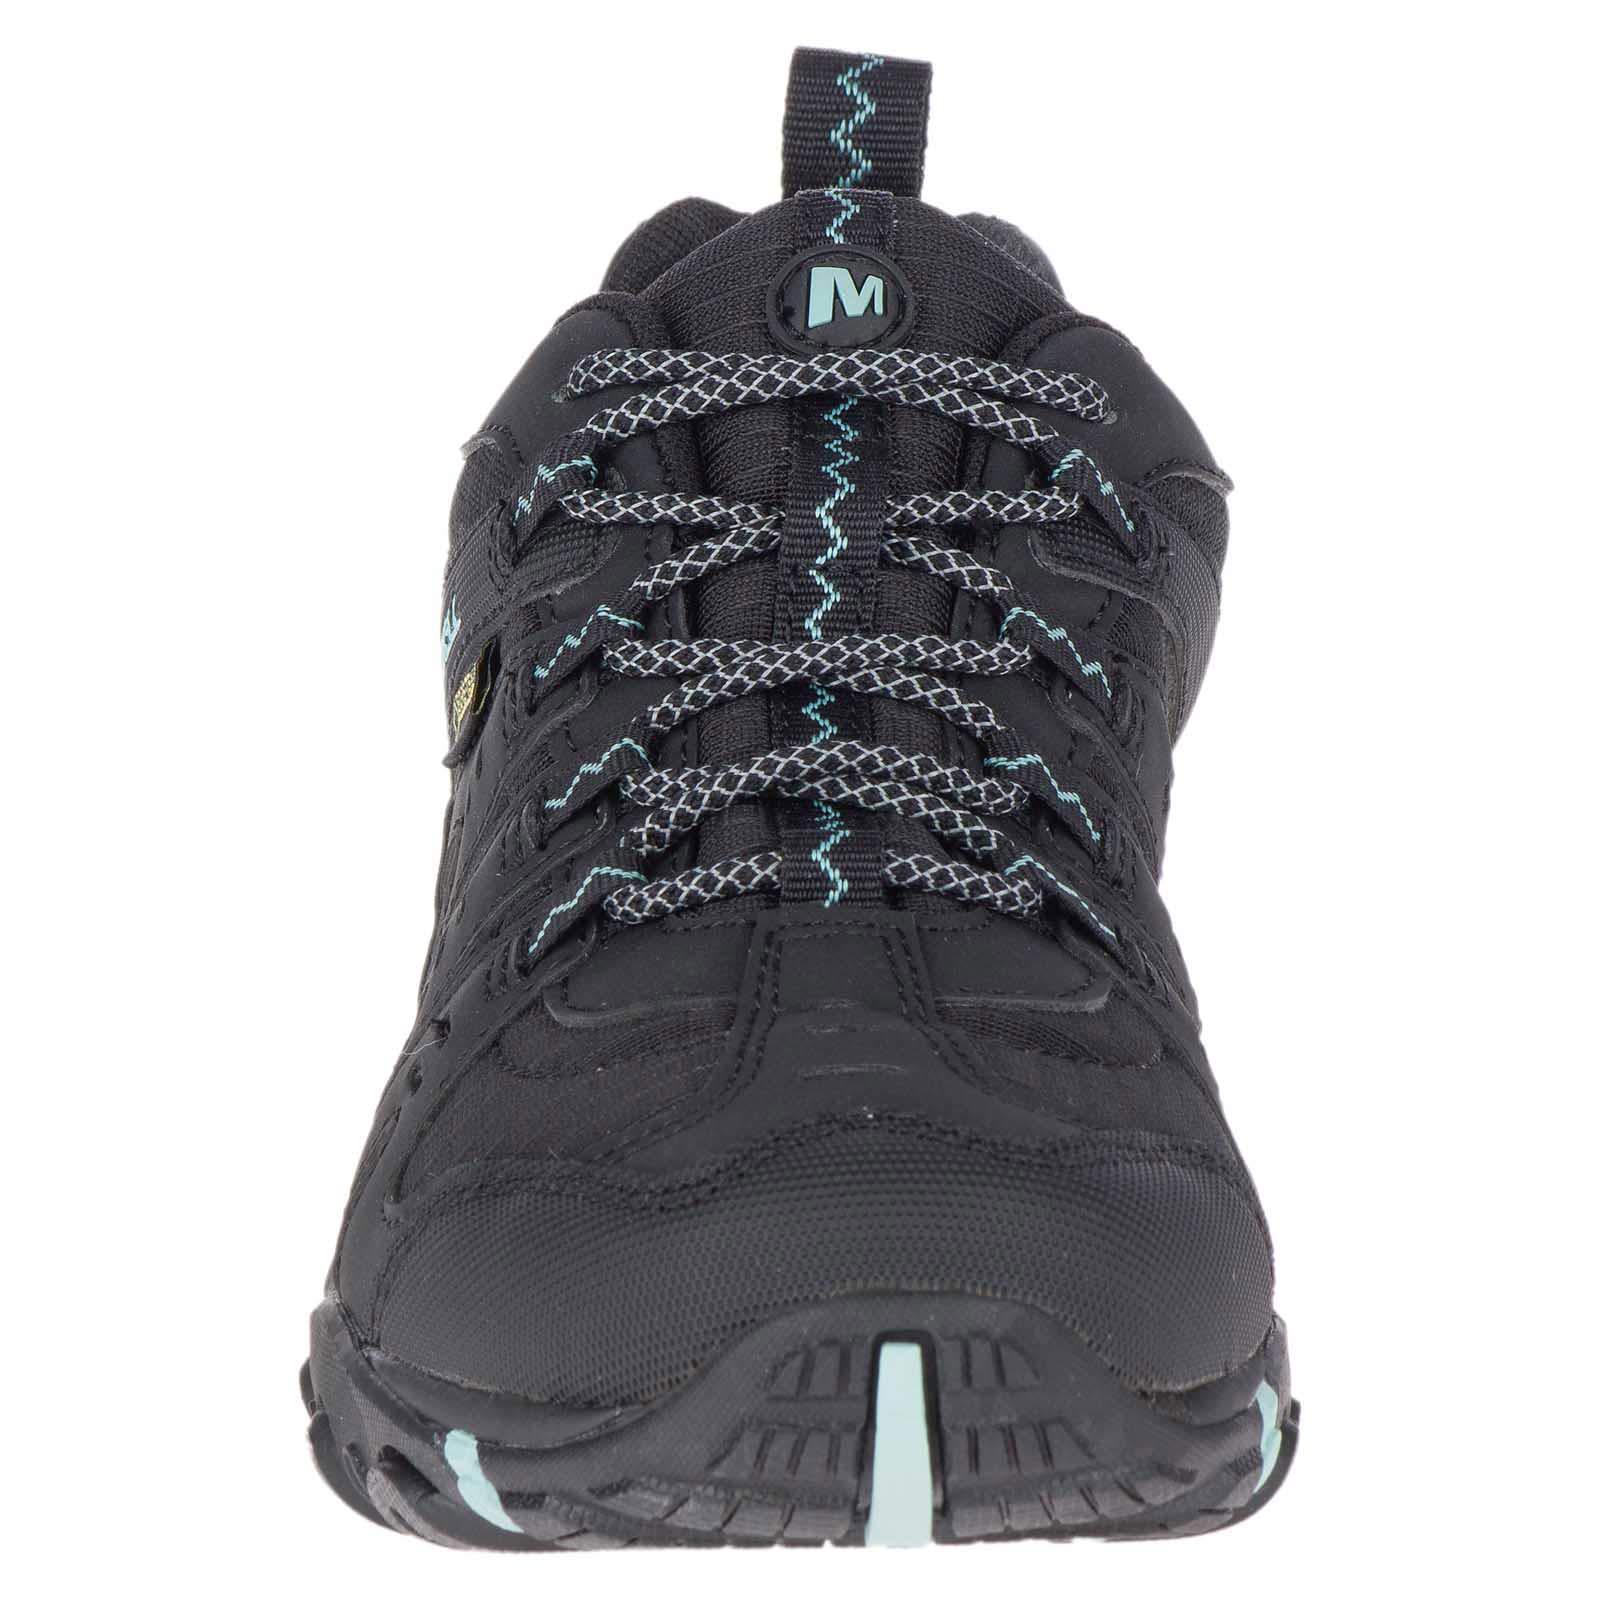 MERRELL ACCENTOR SPORT GORE-TEX® WOMENS HIKING SHOES